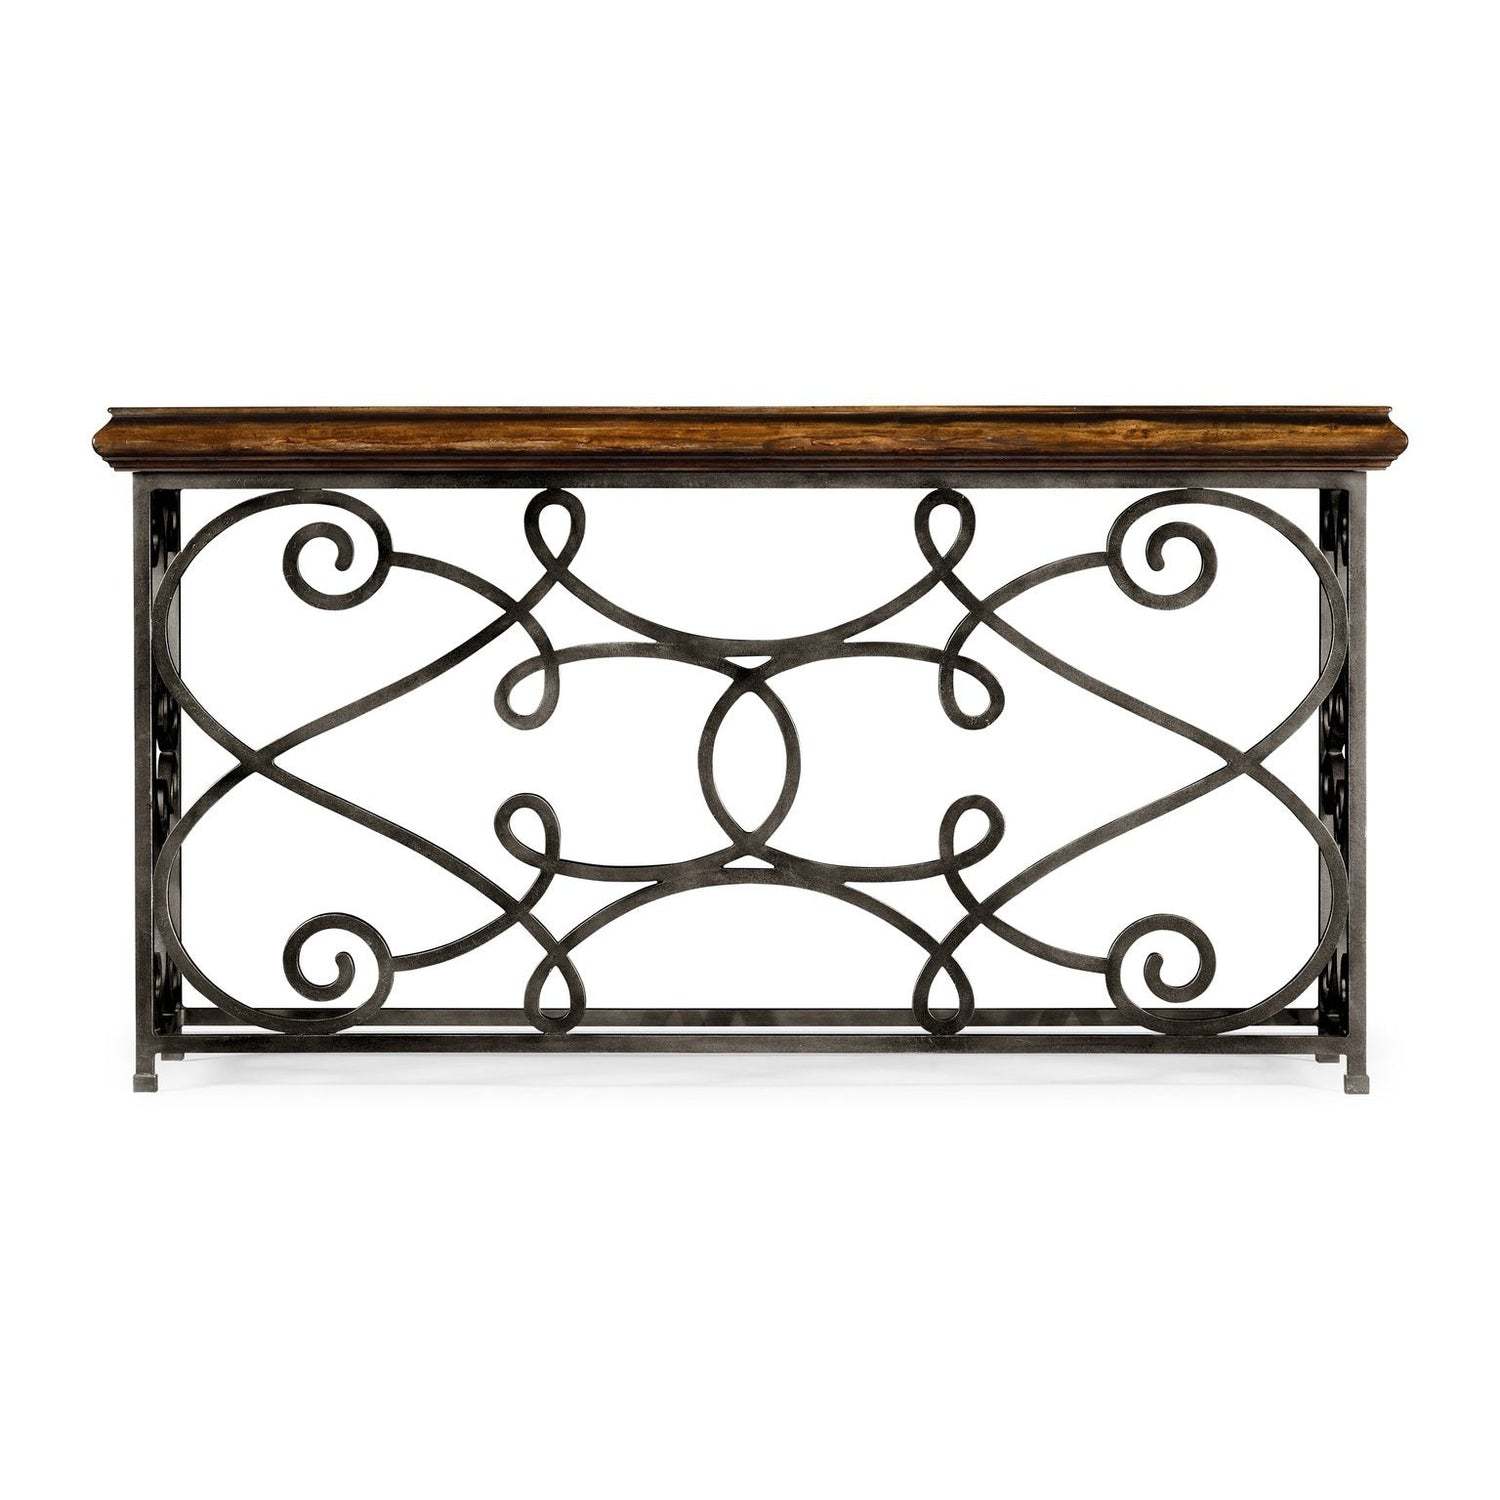 Jonathan Charles, 72" Width Rectangular Rustic Walnut Console with Wrought Iron Base